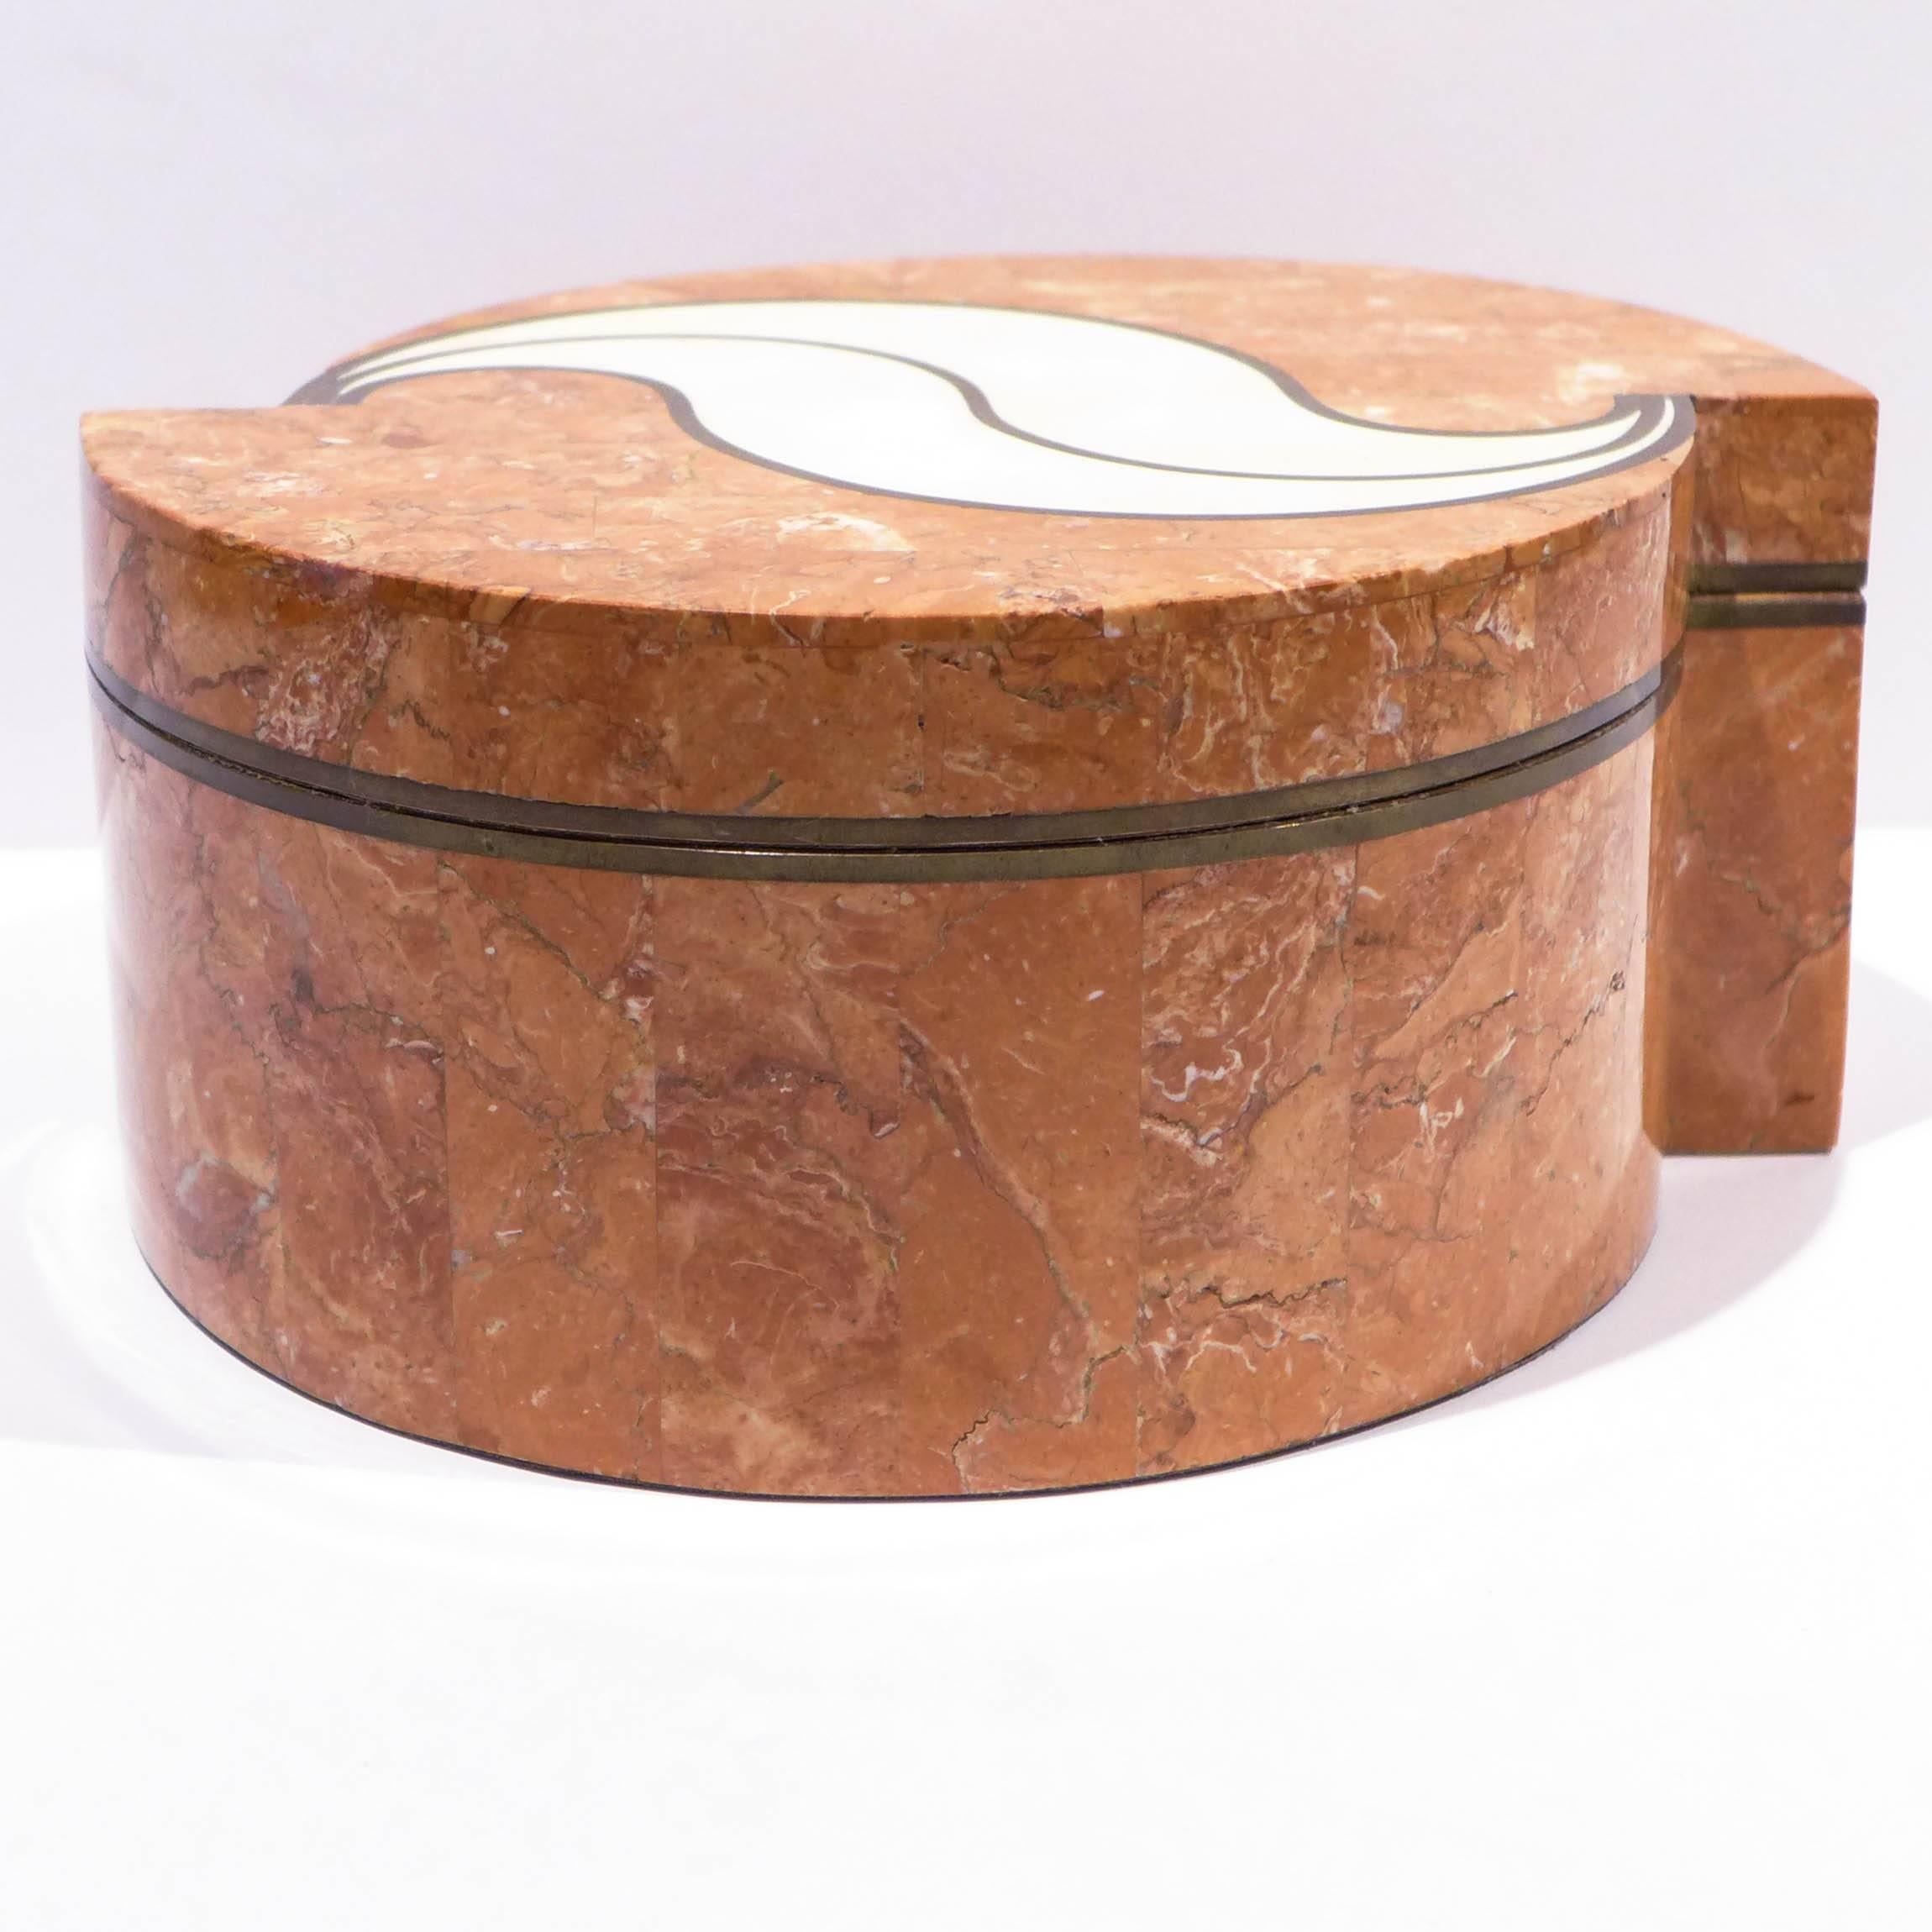 Tessellated stone box with brass trim and eccentric, offset demilune shape and stylized decorative motif. Velvet-lined interior and bottom. Made by Maitland-Smith, circa 1980s.